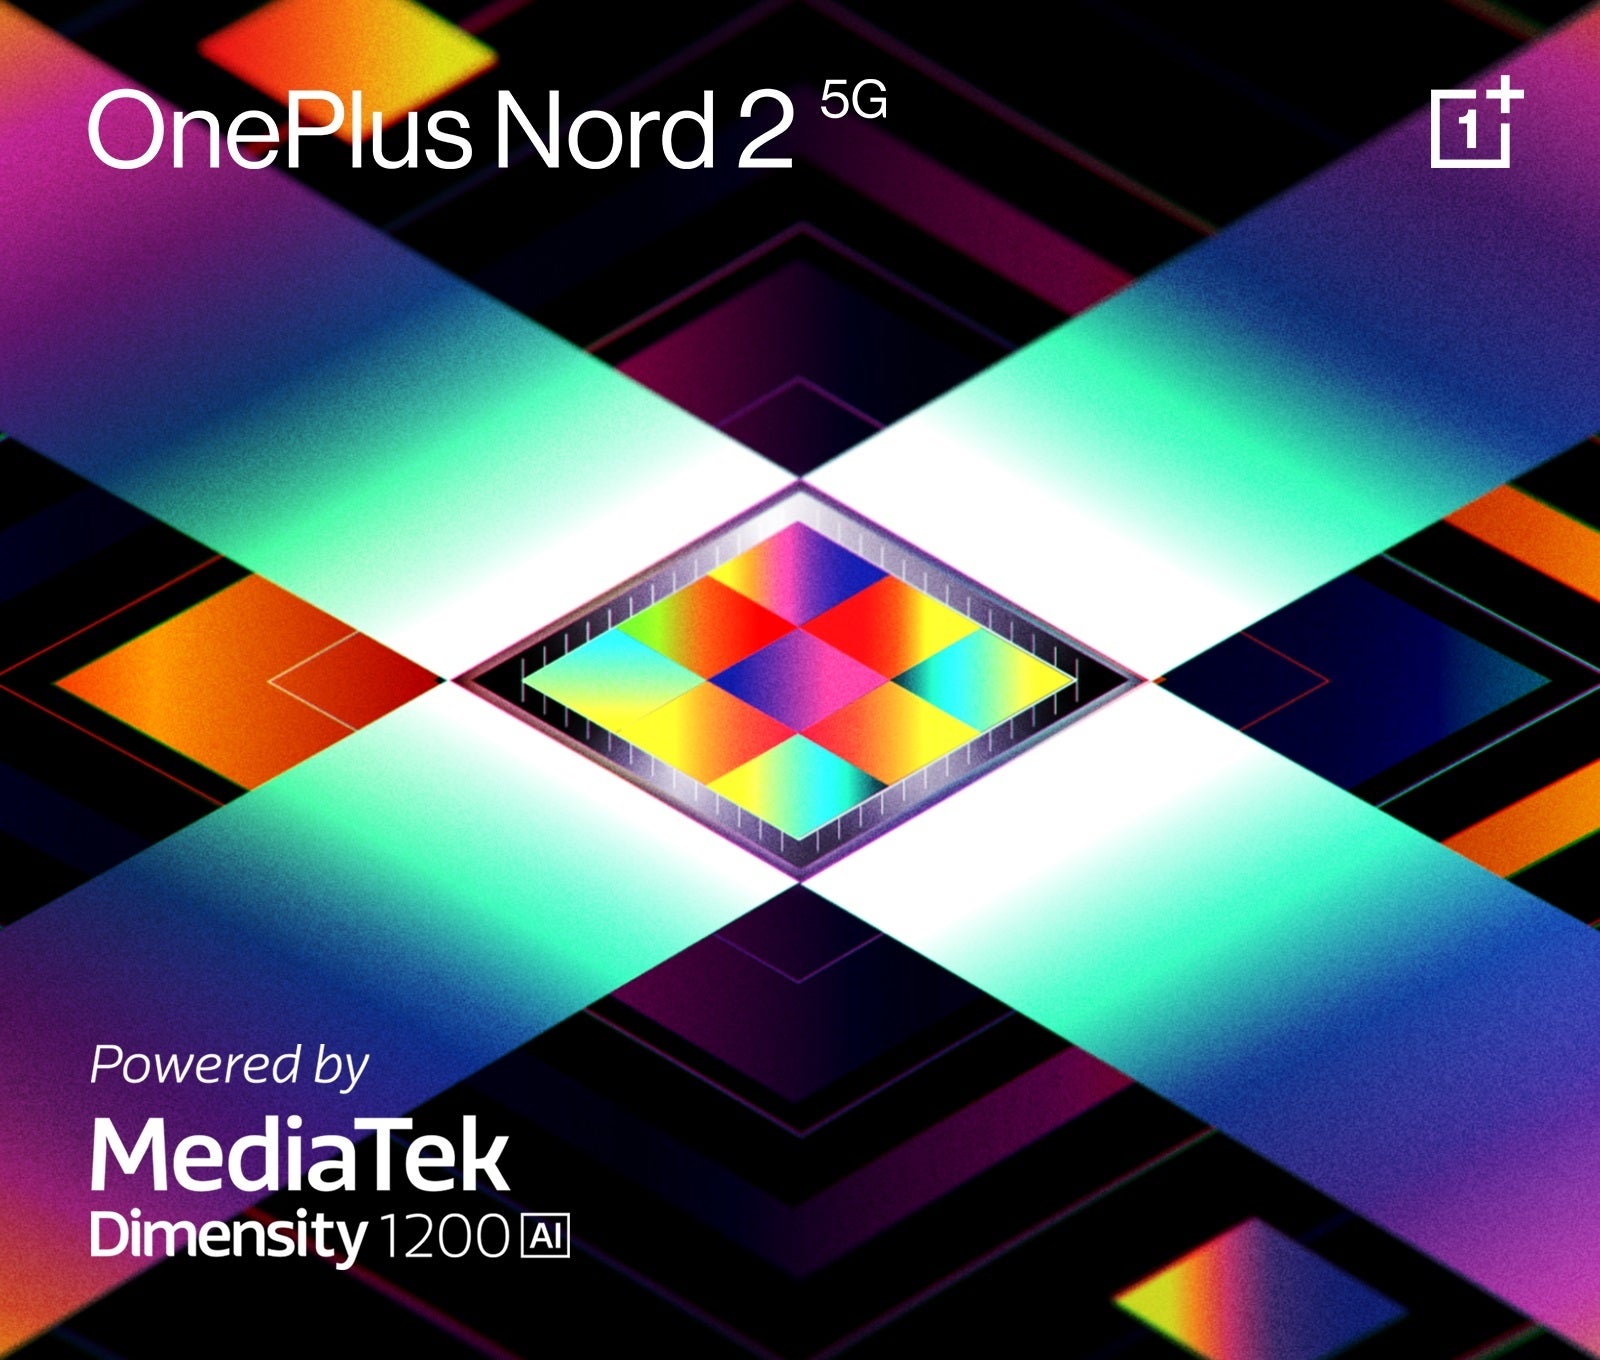 The OnePlus Nord 2 5G will officially ditch Qualcomm for MediaTek